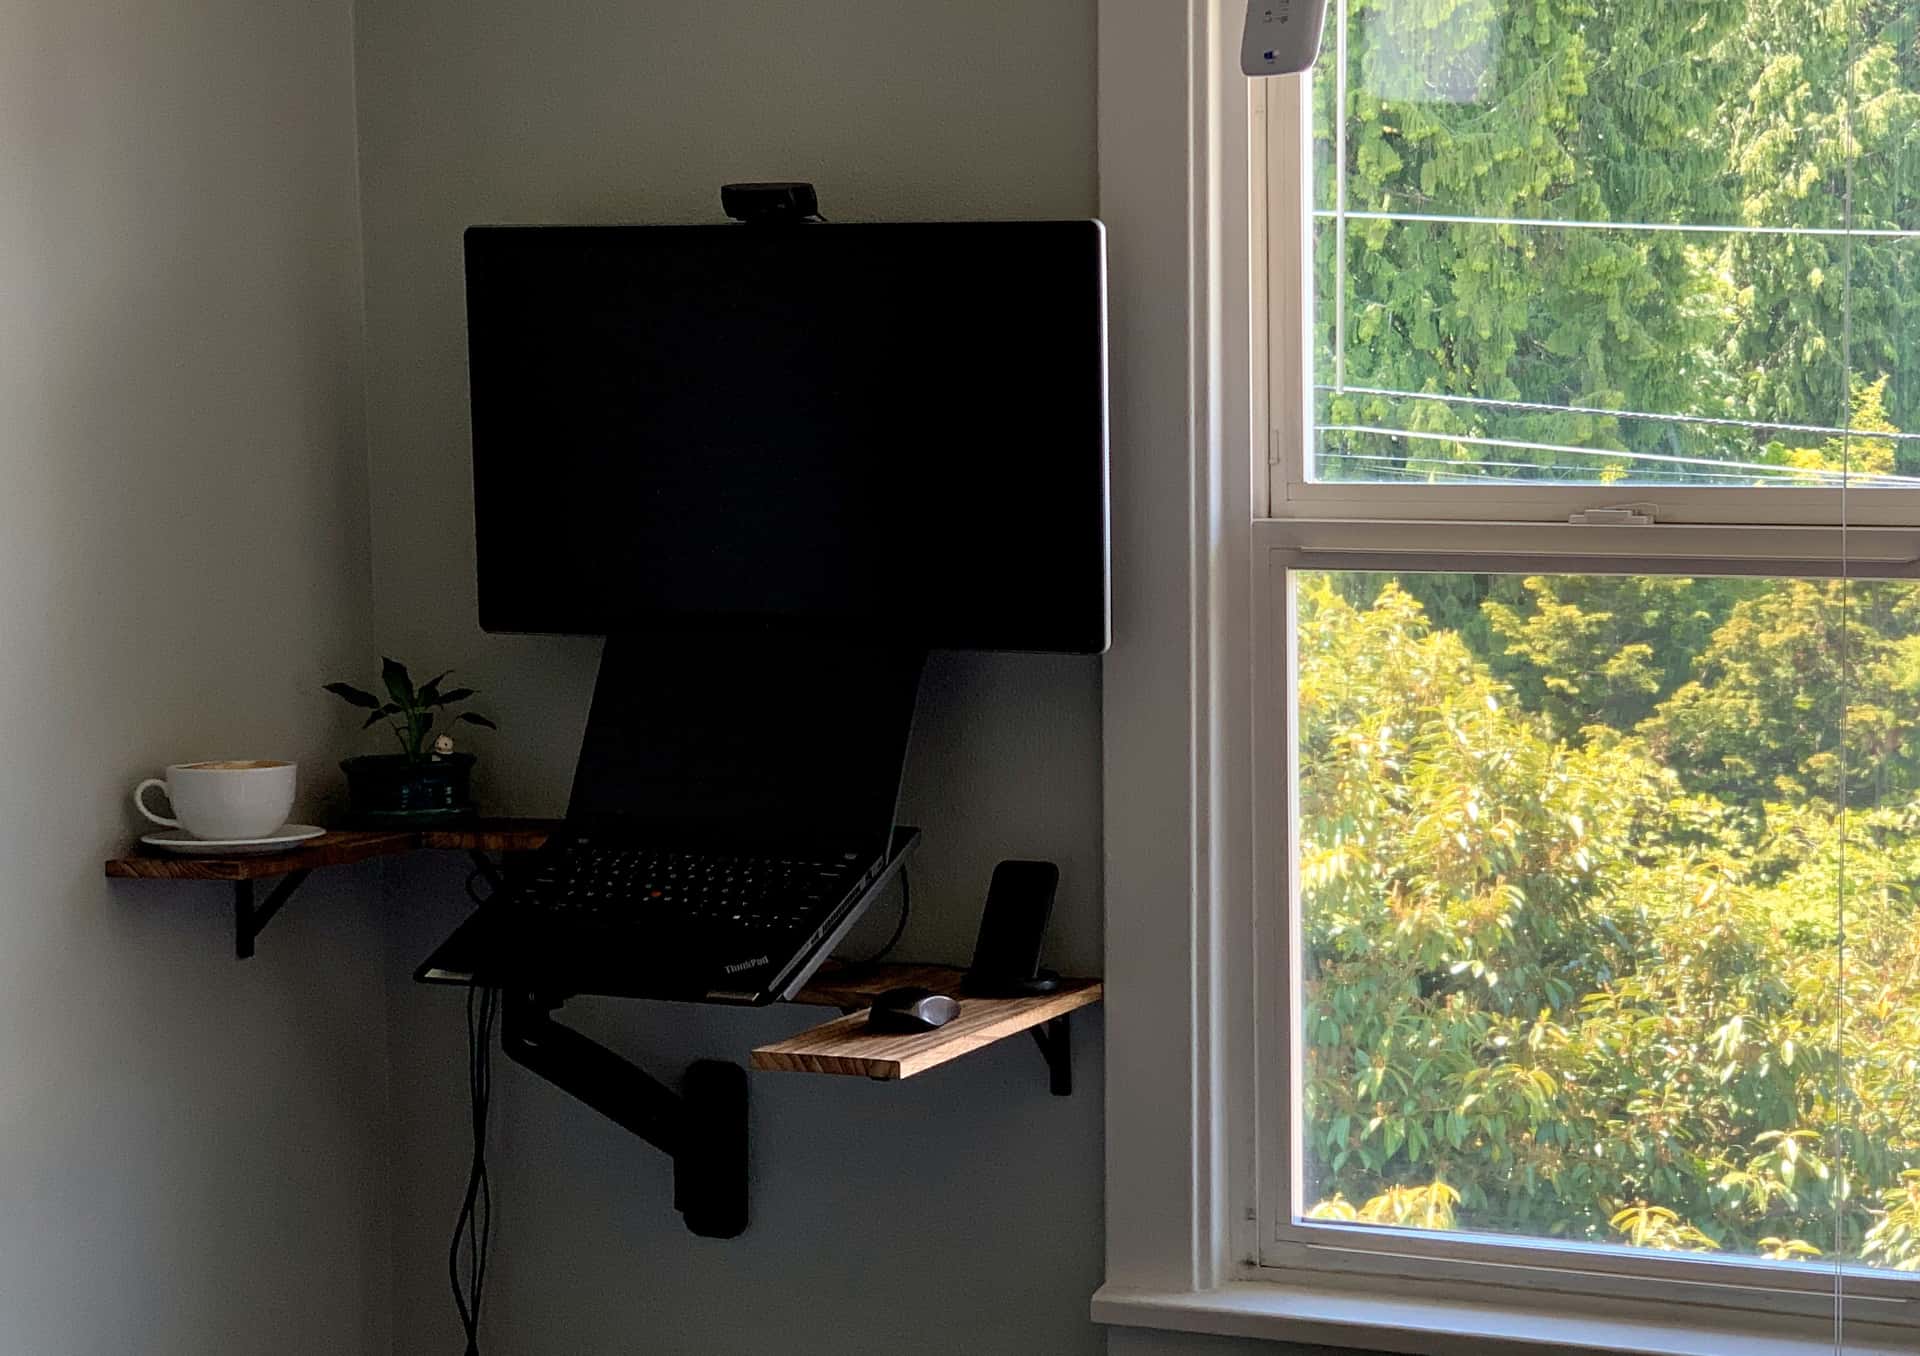 standing desk built from wall-mounted monitor, laptop stand, and shelves